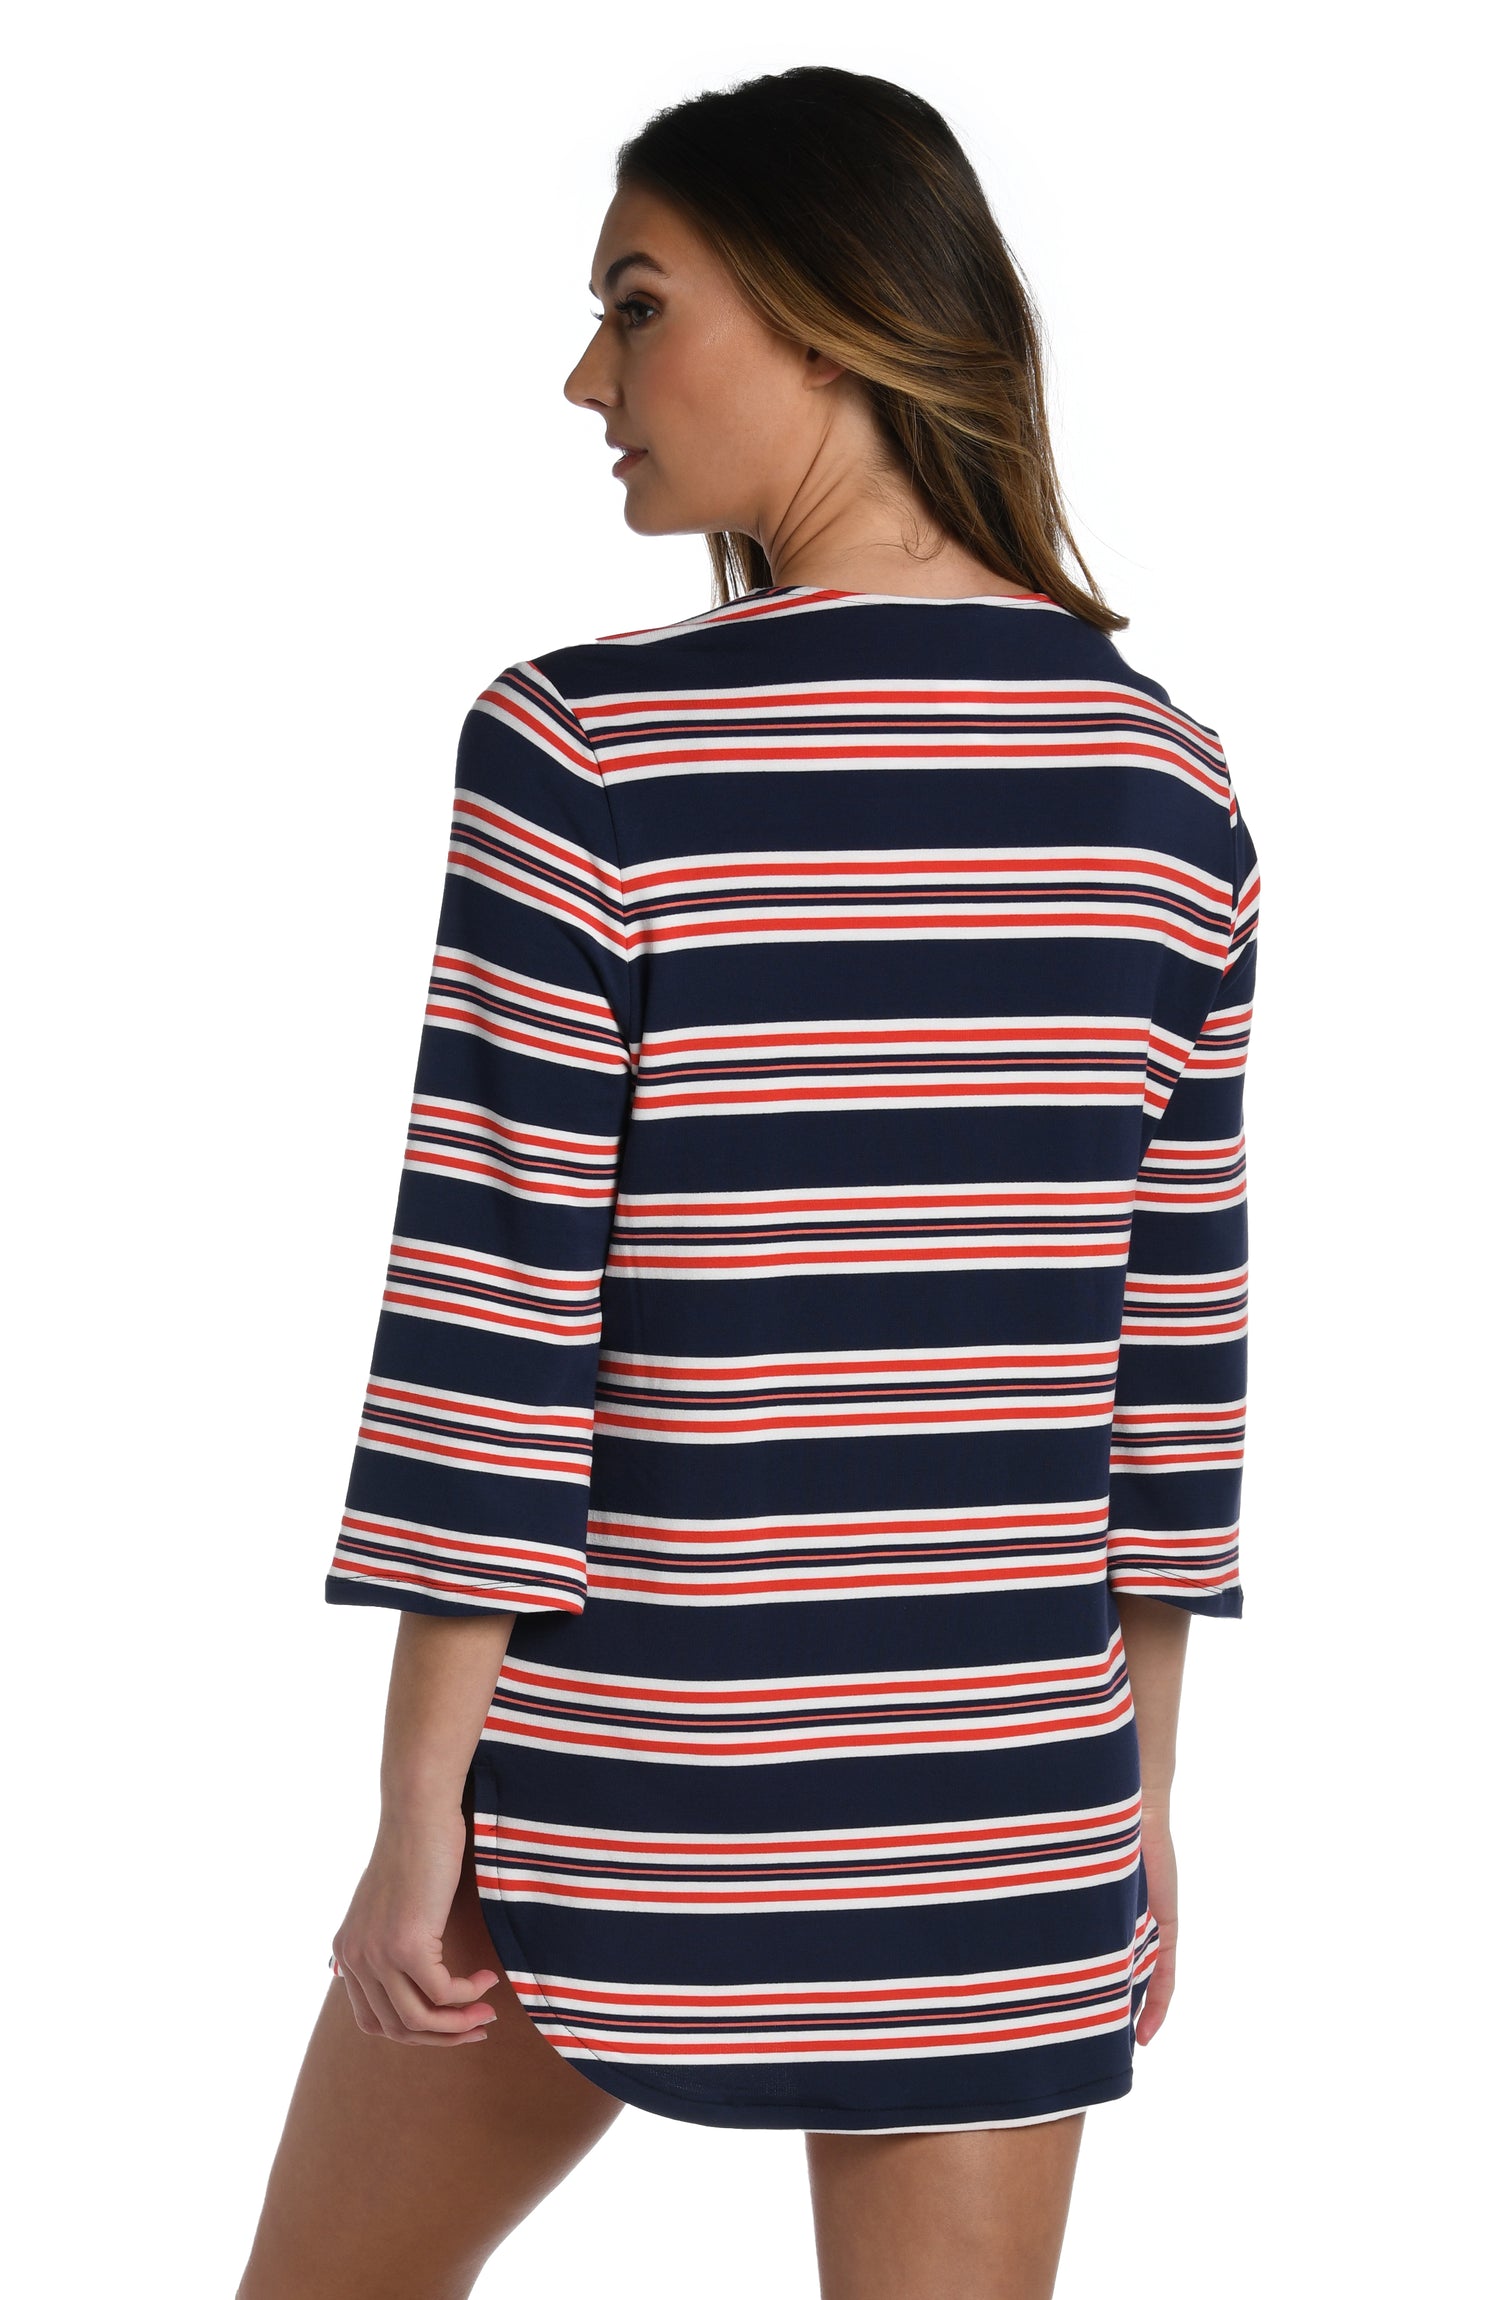 Model is wearing a red, white, and blue striped patterned v-neck tunic from our Sailor Stripe collection!